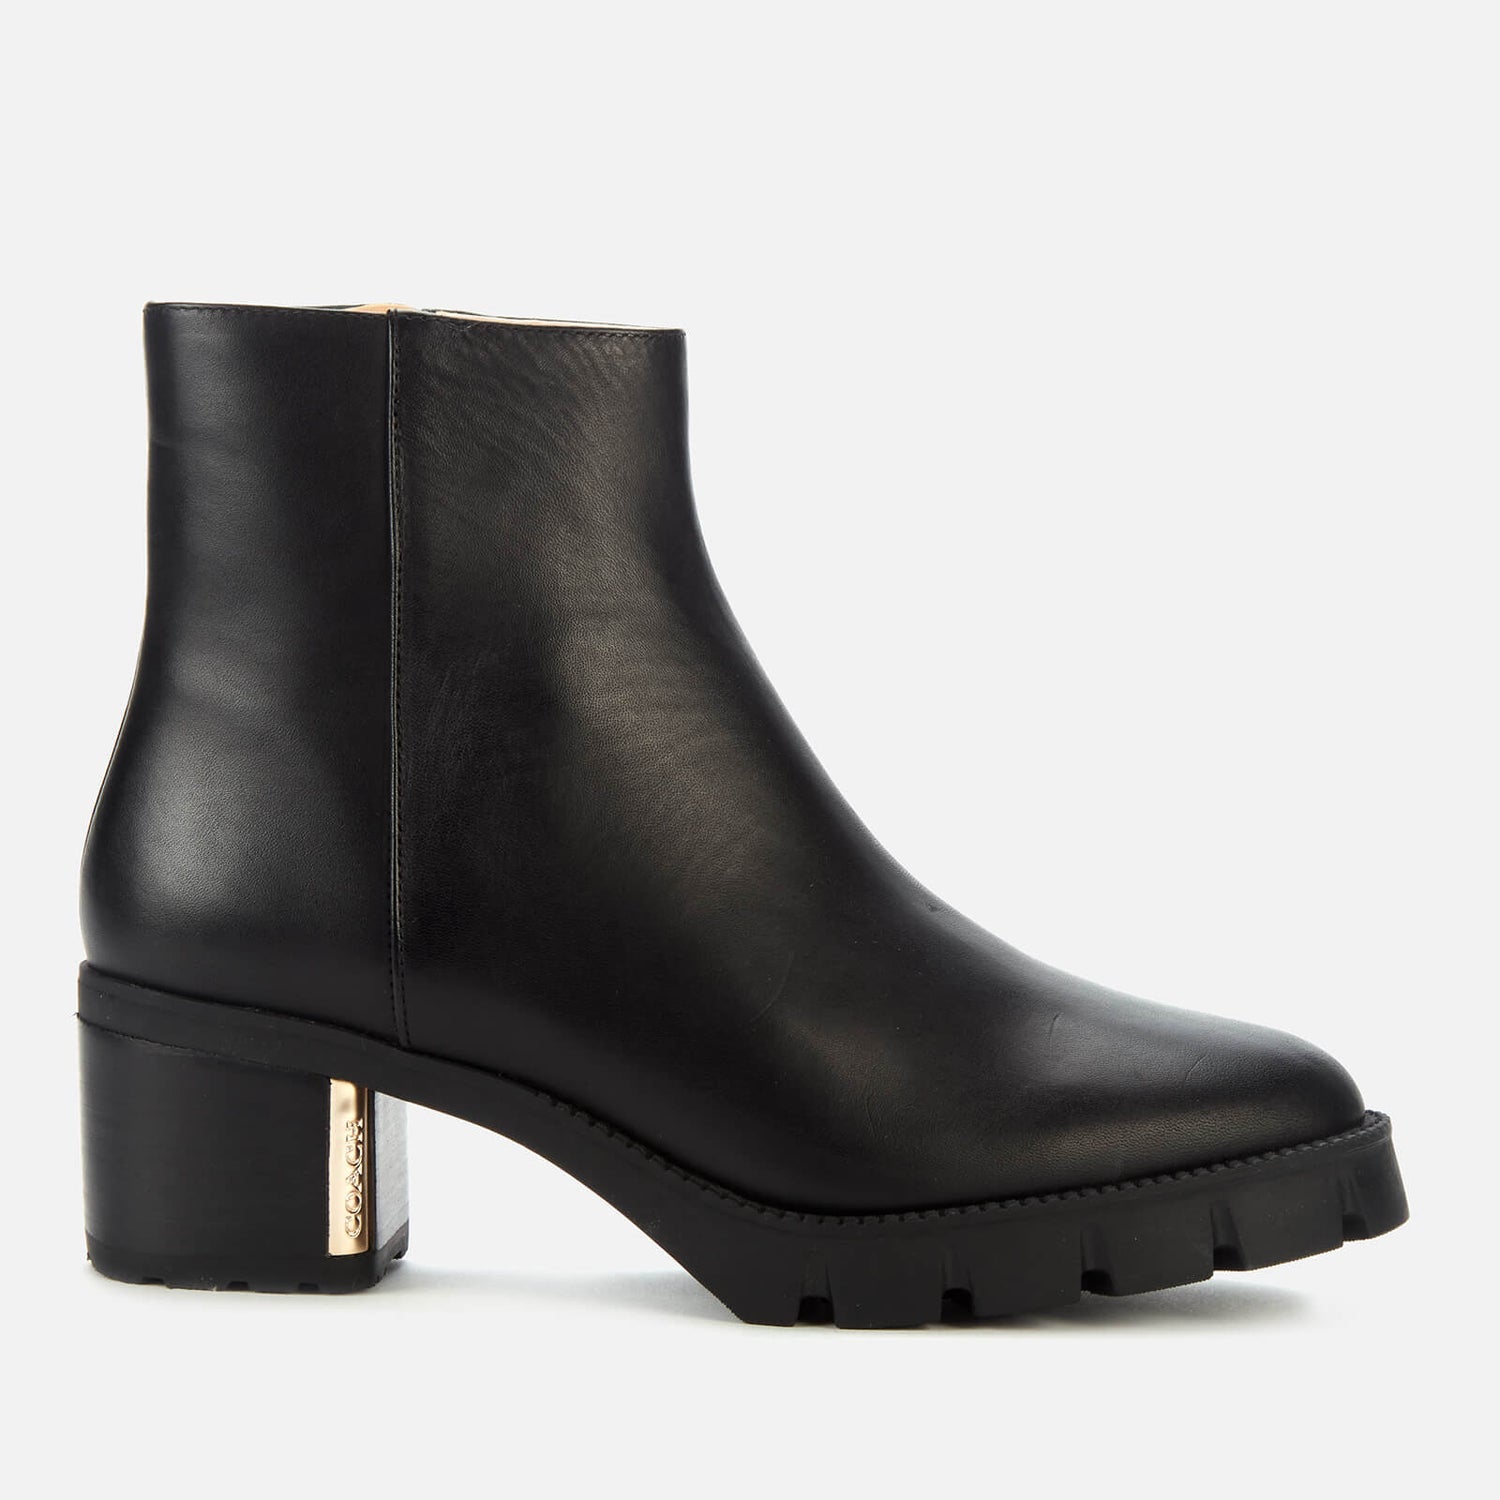 Coach Women's Chrissy Leather Heeled Ankle Boots - Black